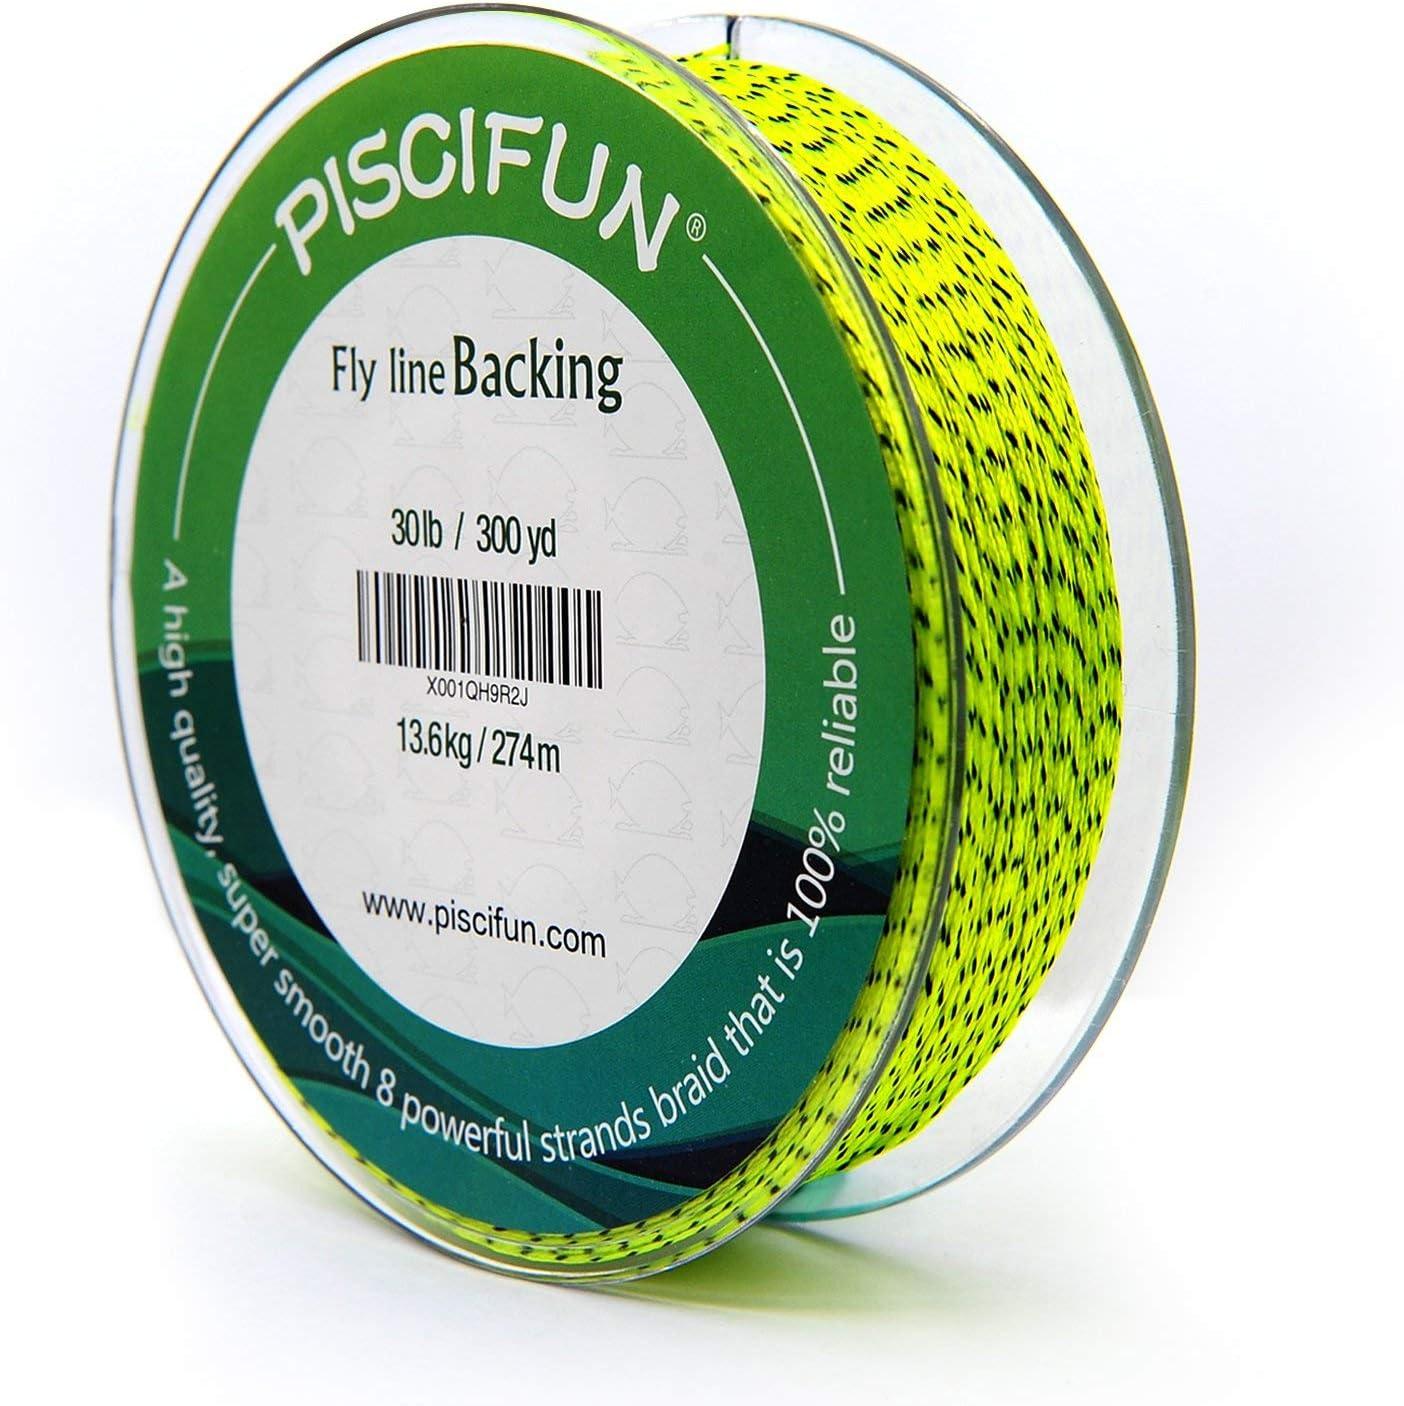 Piscifun Fly Line Backing, Braided Fly Backing Line with Orange